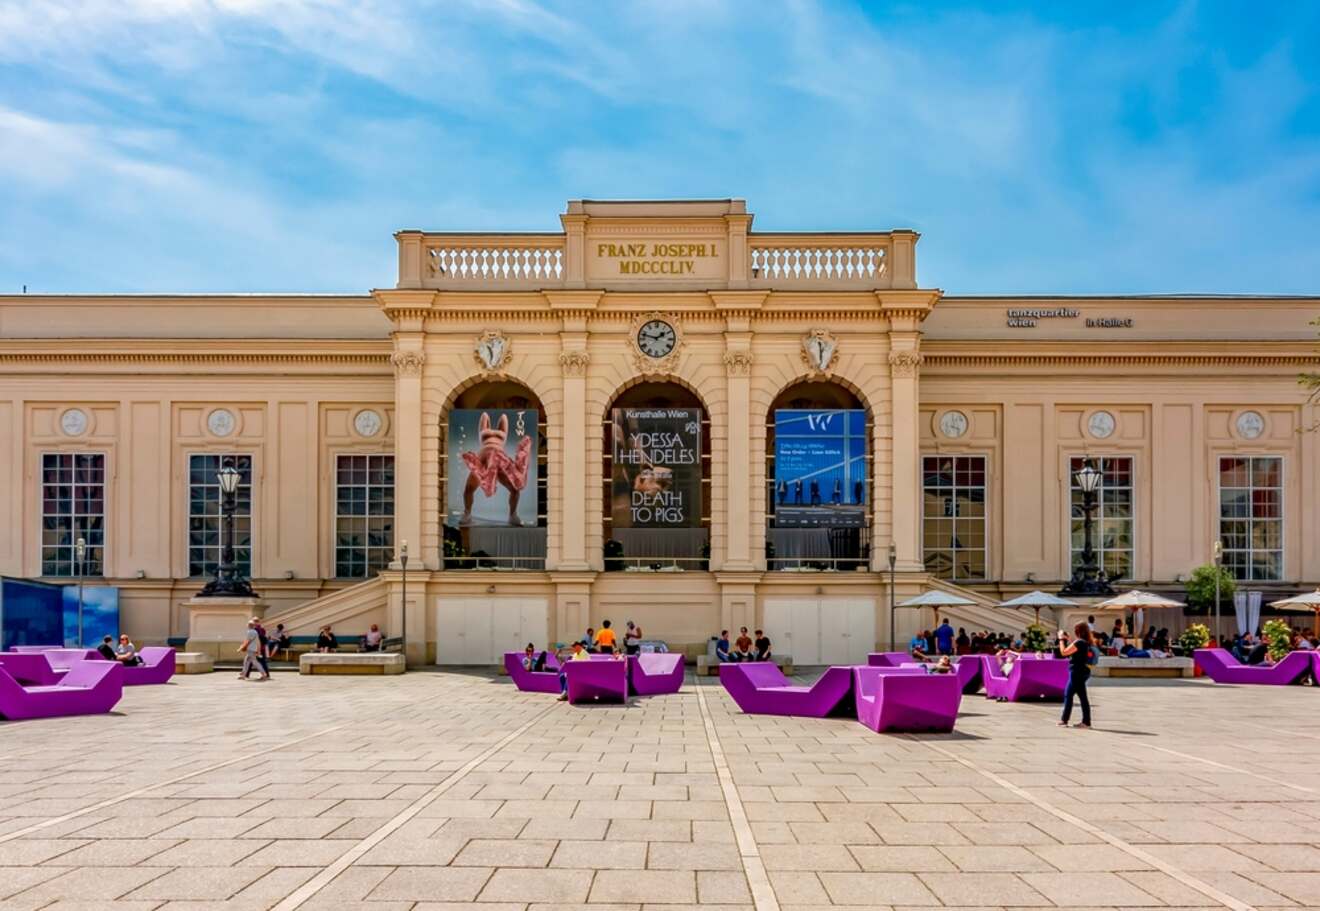 people sitting on benches in front of a museum